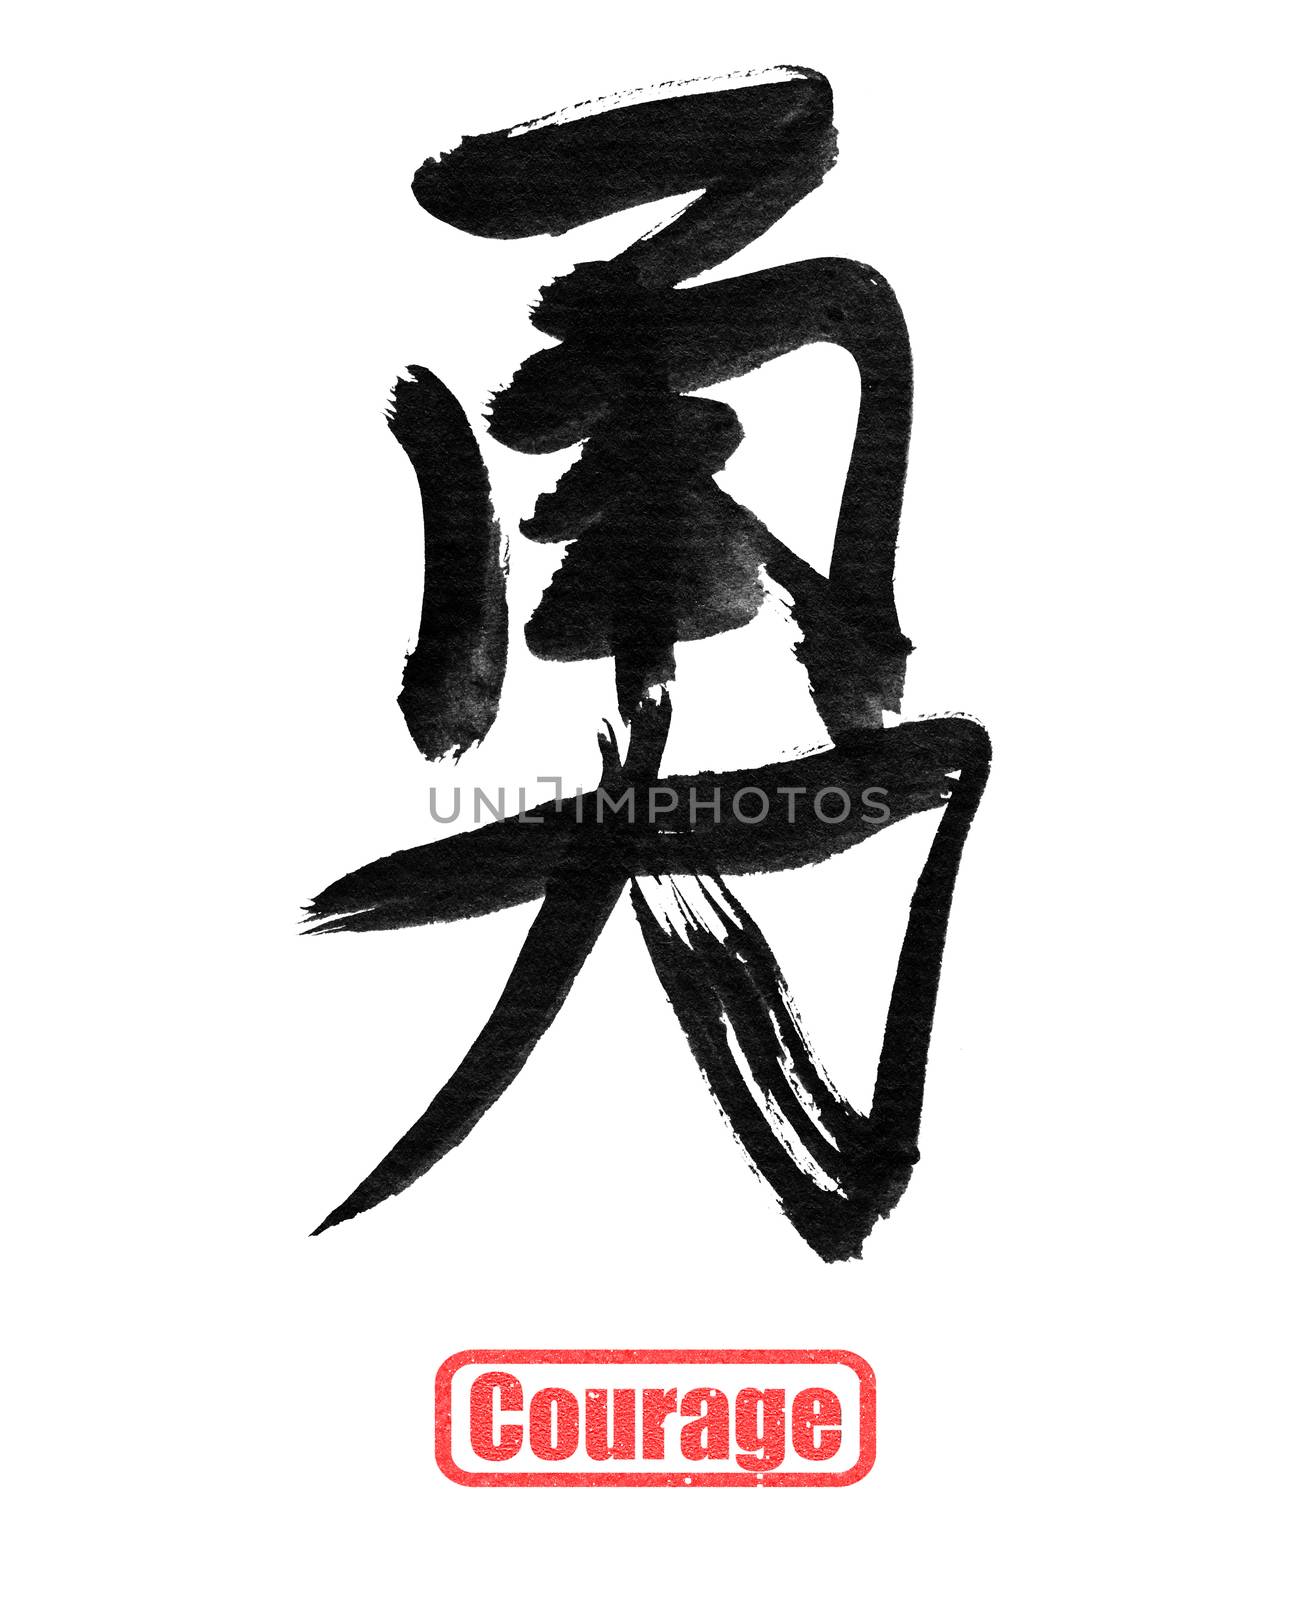 Courage, traditional chinese calligraphy by elwynn